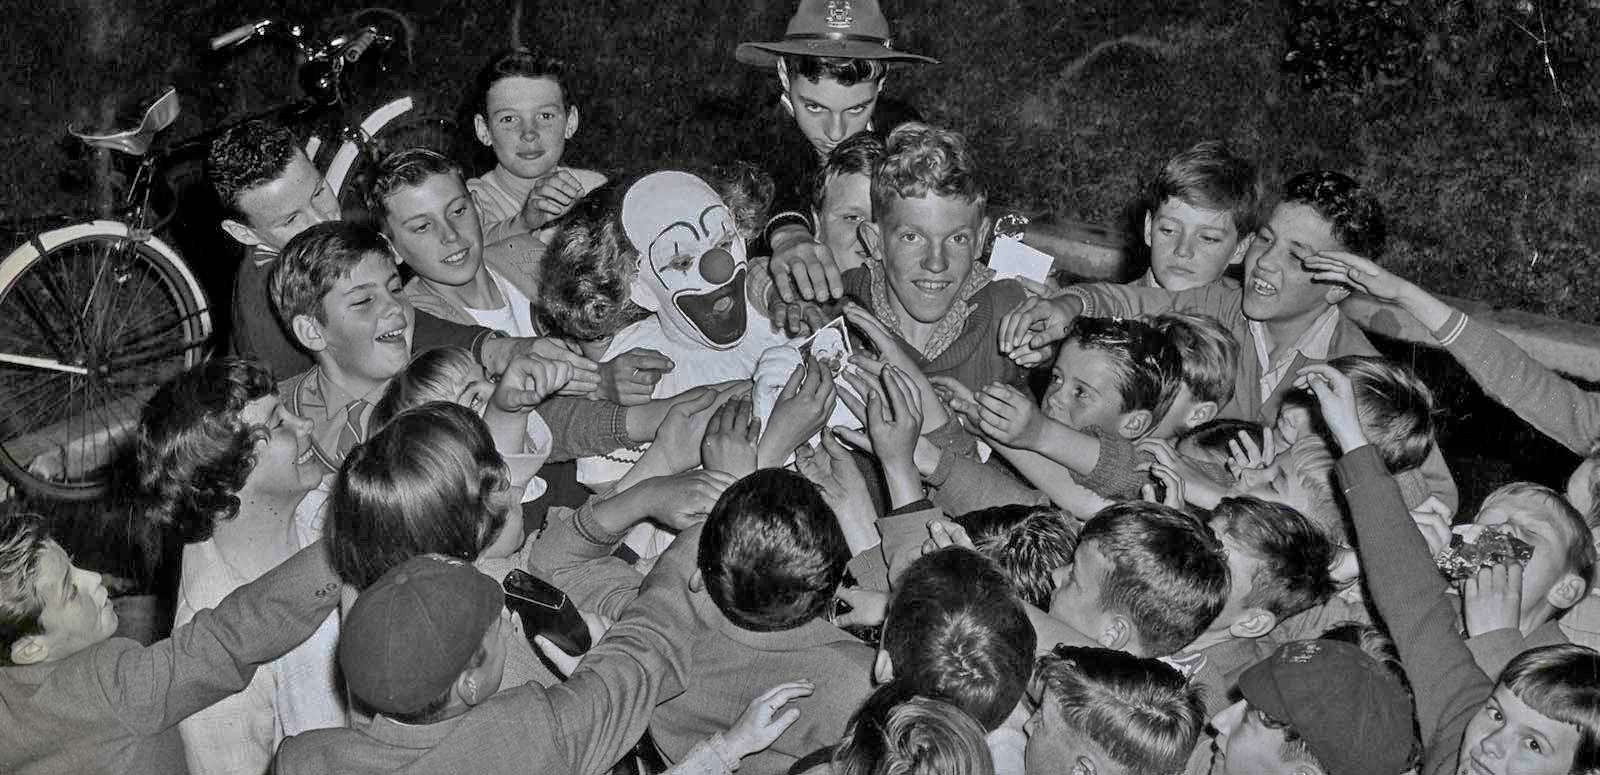 Bobo the clown is surrounded by a crowd of children reaching out to touch him